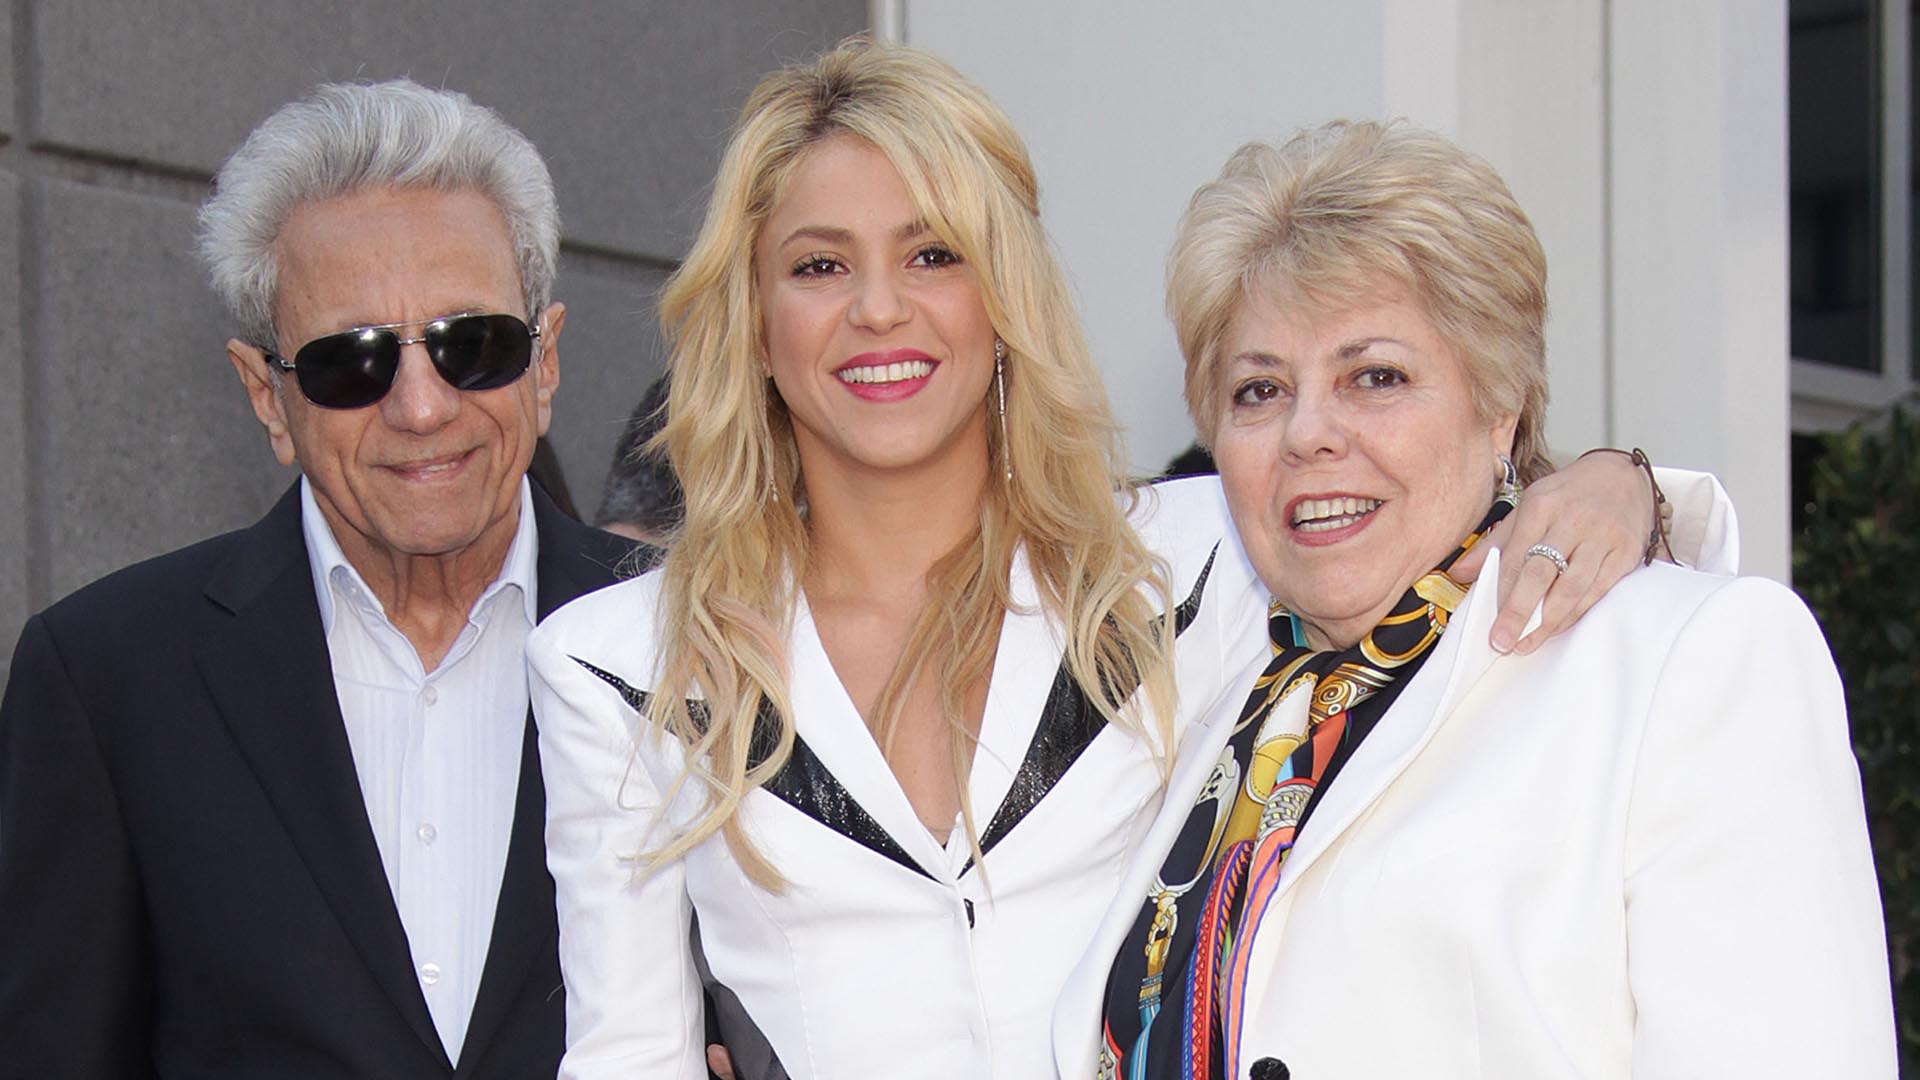 Singer Shakira (C) poses next to her star with her father William Mebarak Chadid (L) and mother Nidia del Carmen Ripoli Torrado (R) during an unveiling ceremony honoring her with the 2,454th star on the Hollywood Walk of Fame in Los Angeles on November 8, 2011.